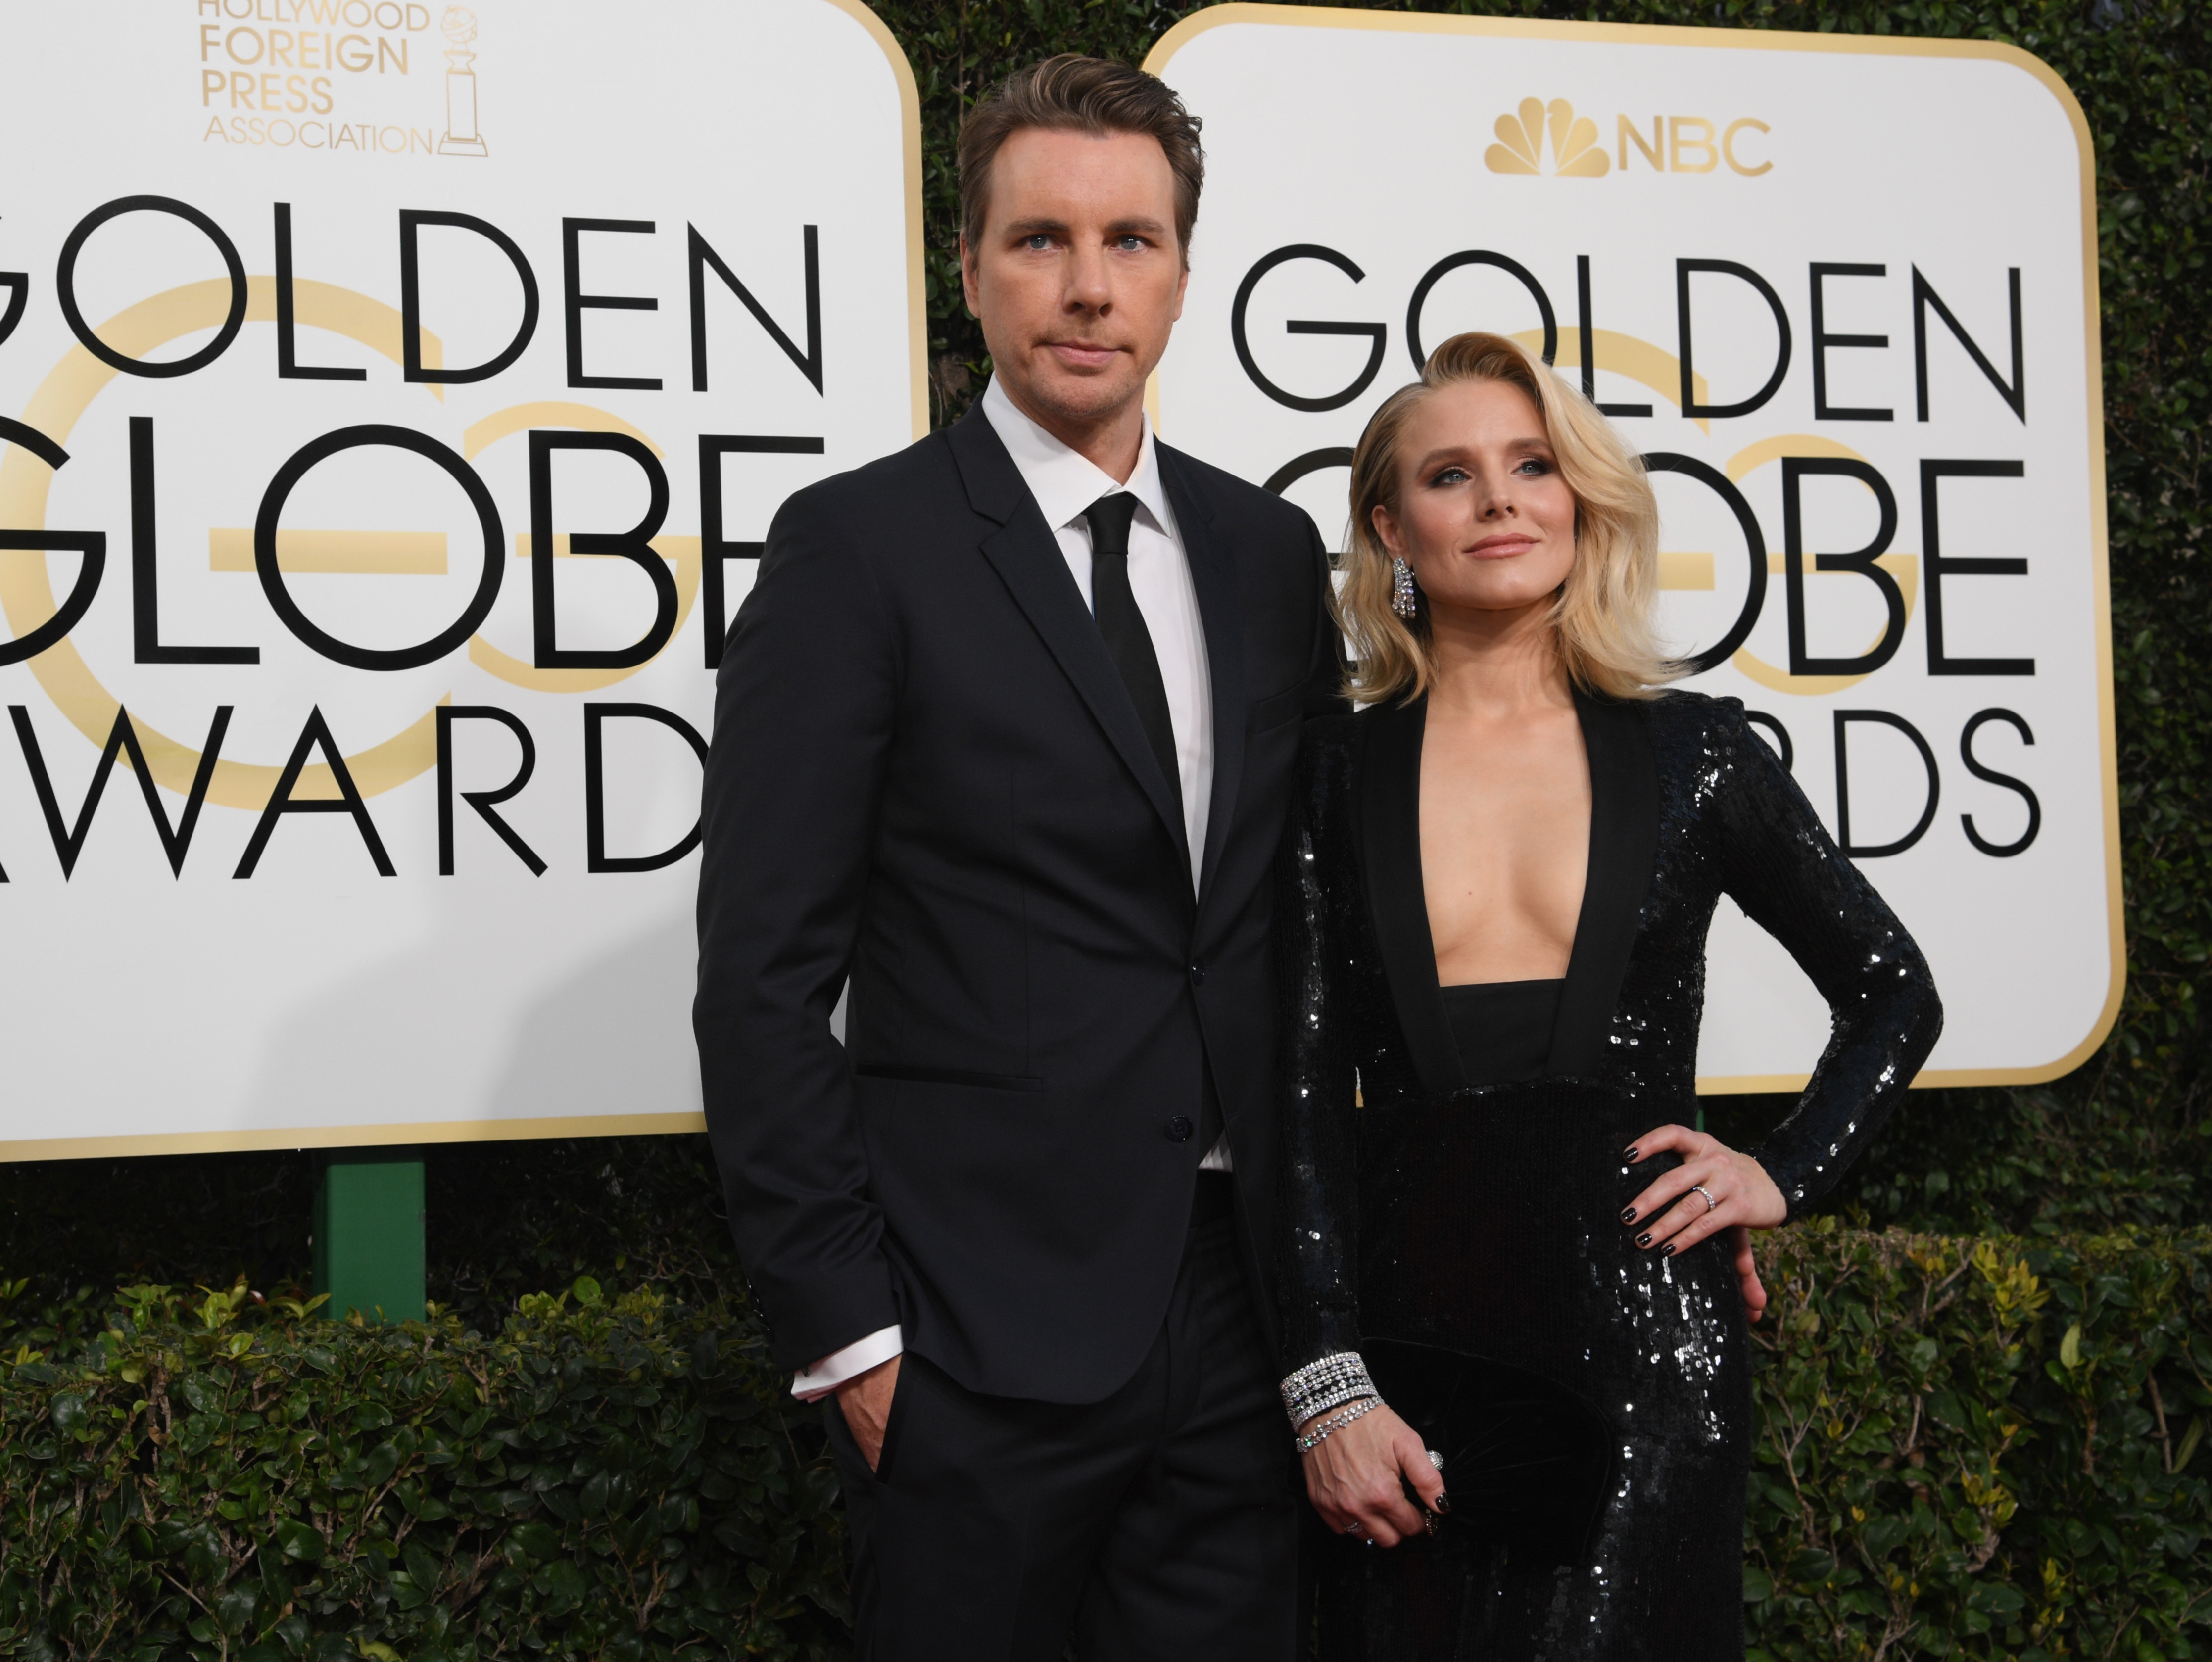 Dax Shepard and Kristen Bell arrive to the 74th Annual Golden Globe Awards, held at the Beverly Hilton Hotel on Jan. 8, 2017. (Kevork Djansezian/NBC—NBCU Photo Bank via Getty Images via Getty Images)